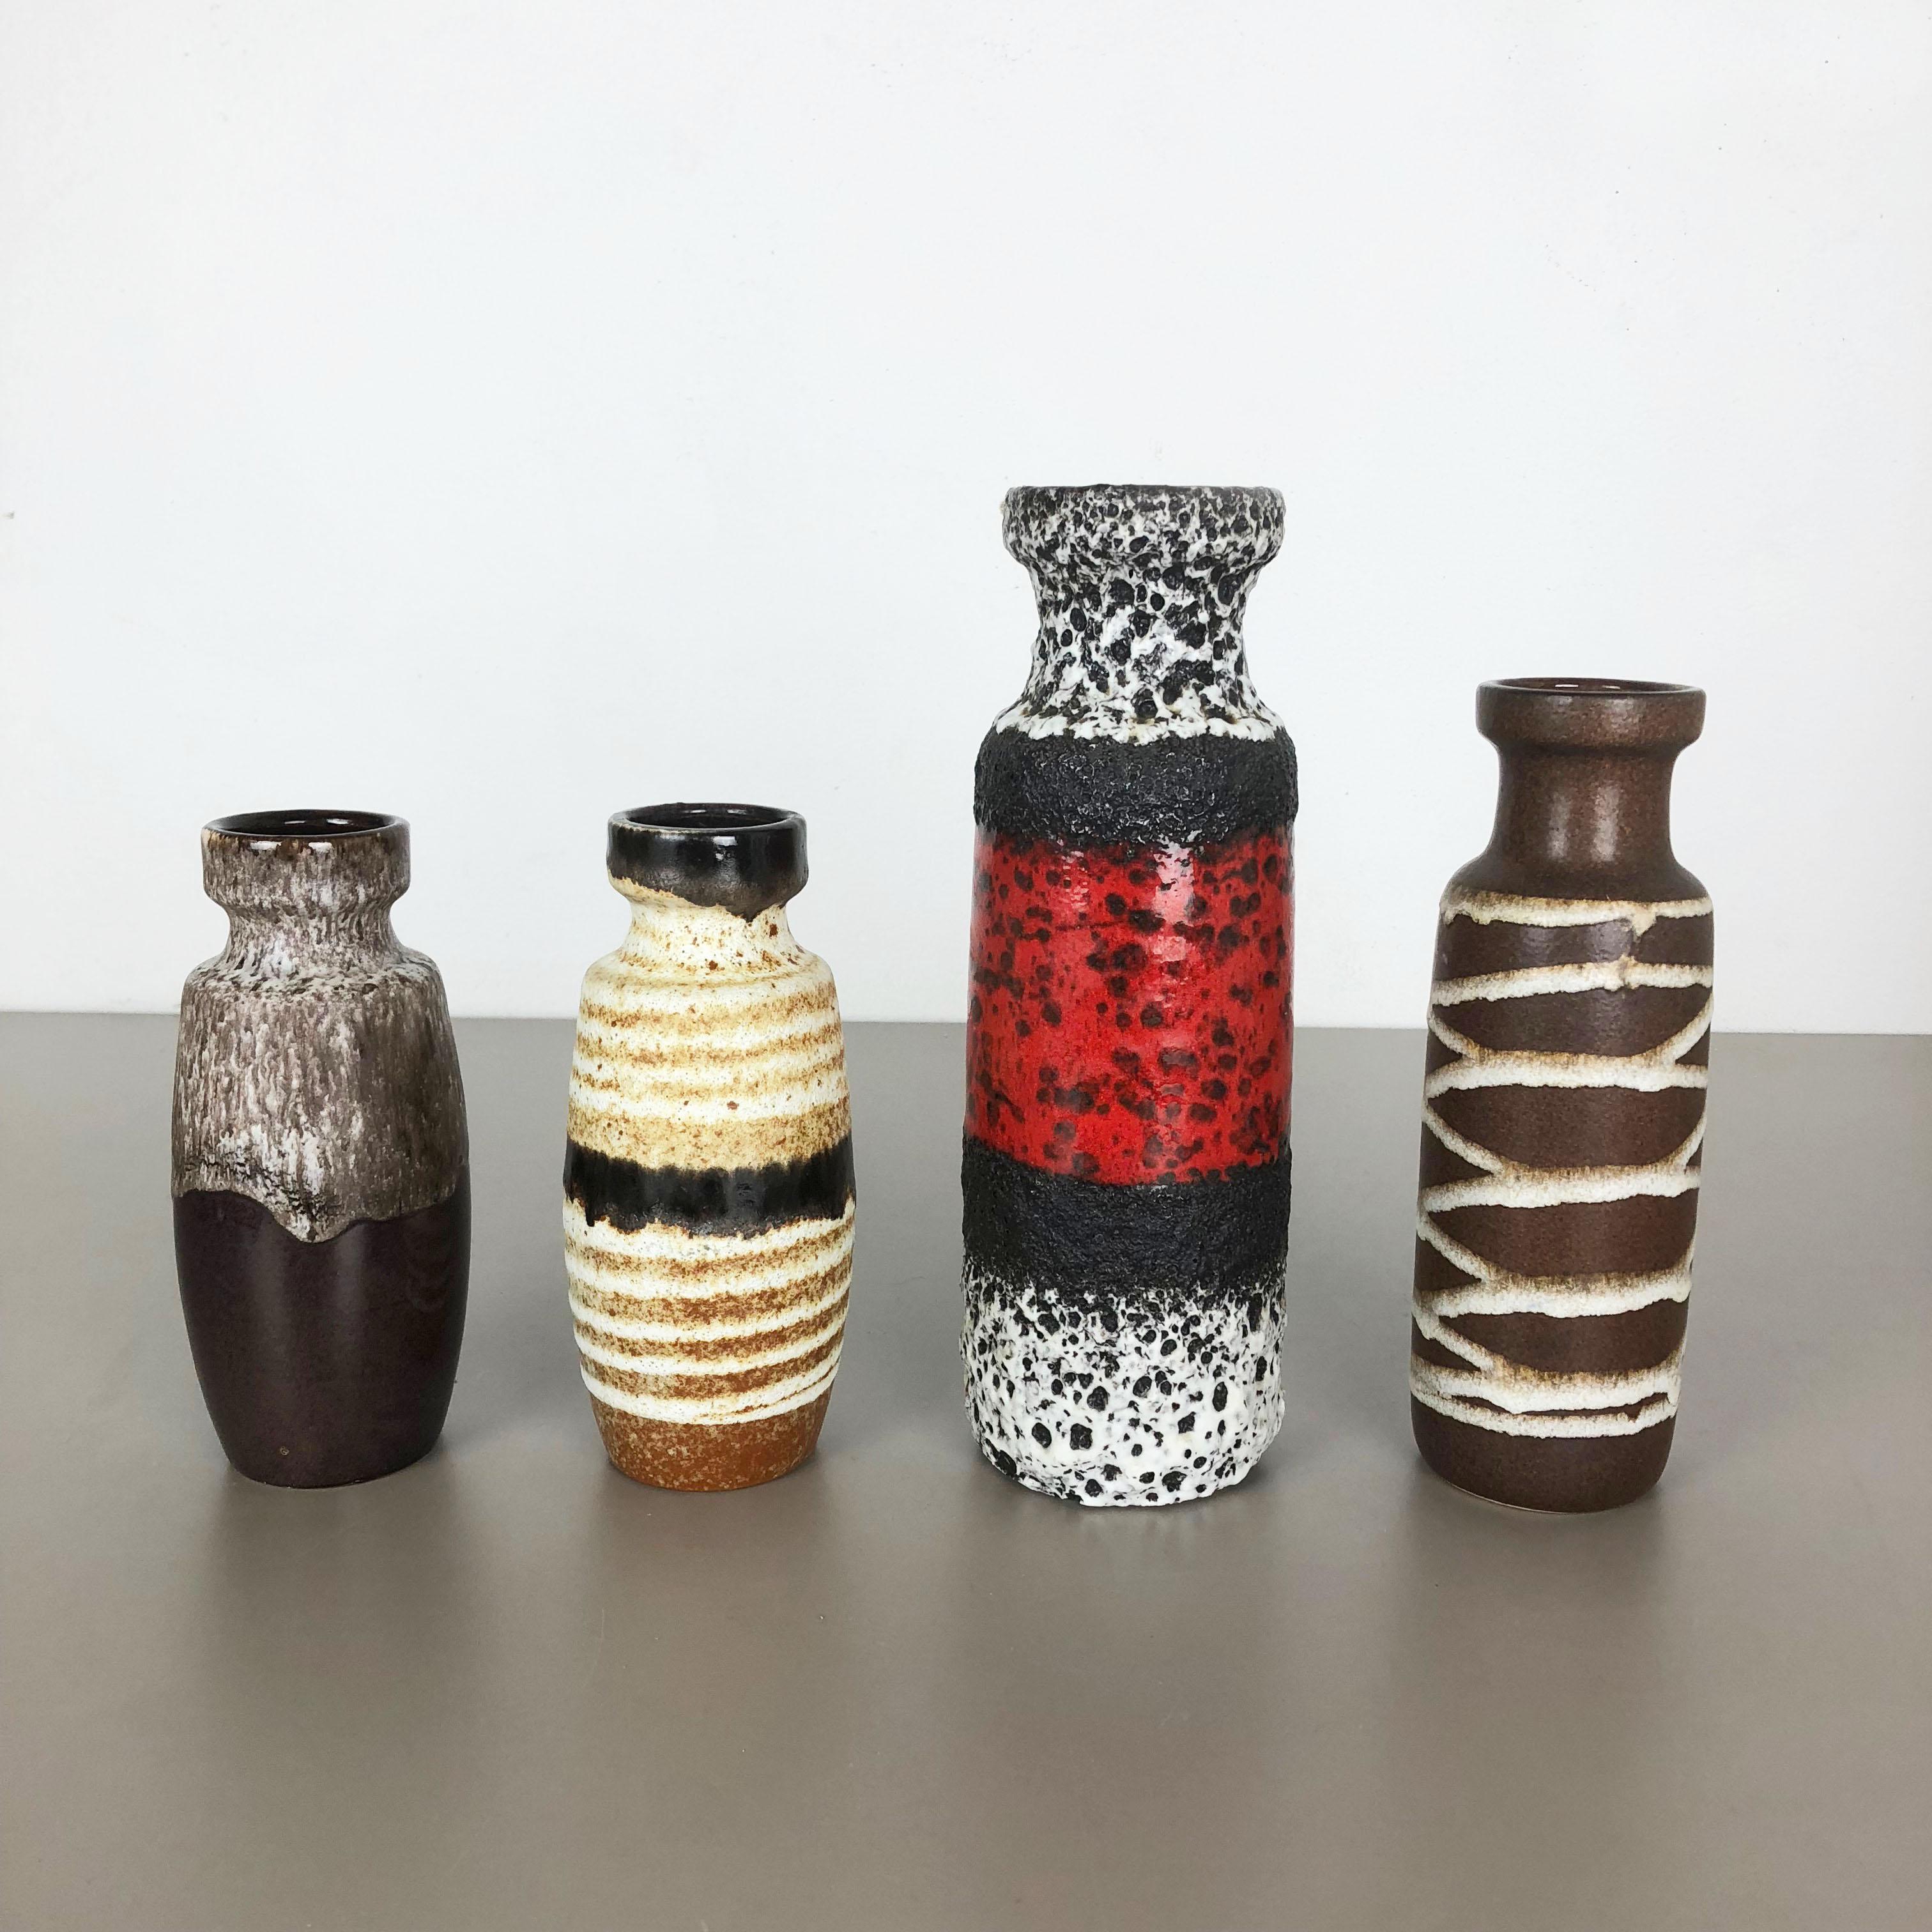 Article:

Set of four fat lava art vases

Producer:

Scheurich, Germany

Decade:

1970s

model:
210-18
200-22
200-28

These original vintage vases was produced in the 1970s in Germany. It is made of ceramic pottery in fat lava